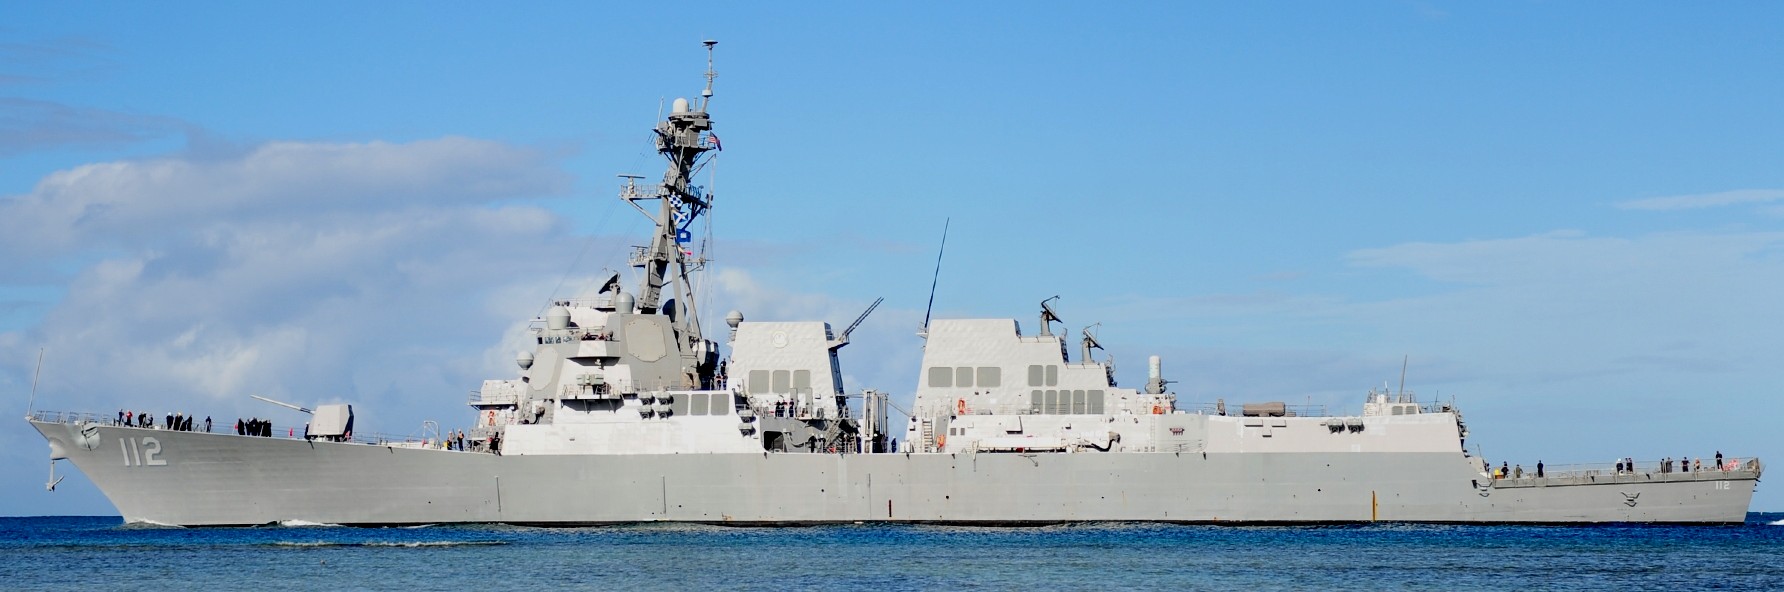 ddg-112 uss michael murphy arleigh burke class guided missile destroyer aegis us navy 19